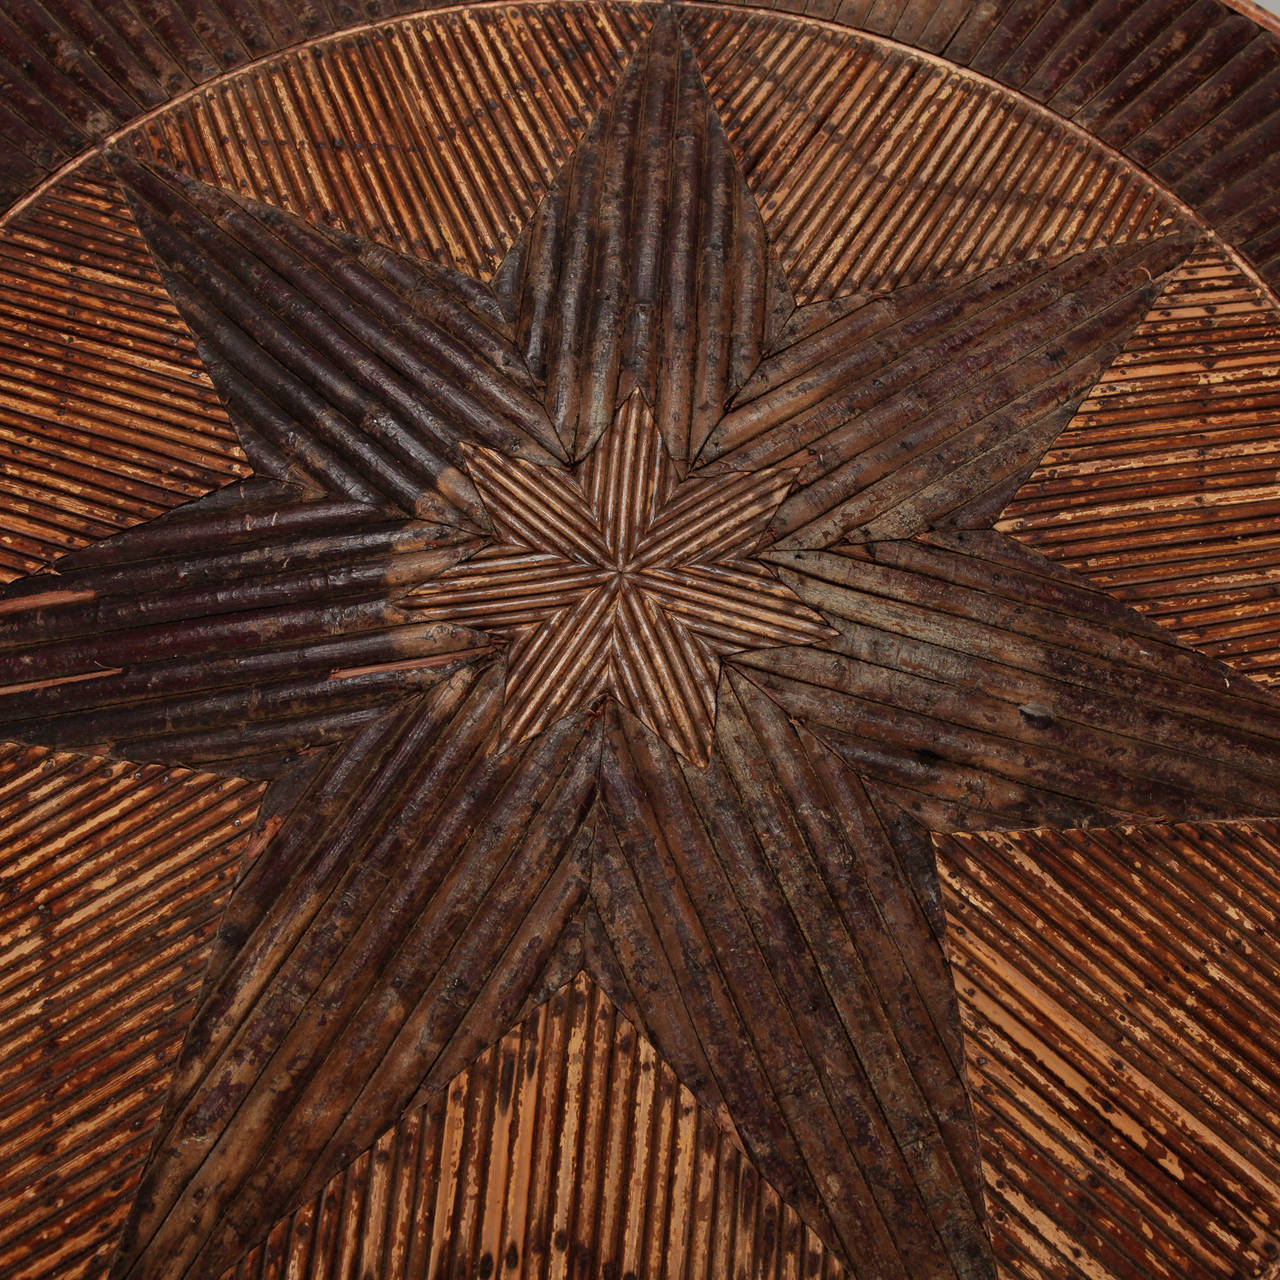 Early 20th Century French Round Bent Willow Twig Table With Star Design Inlay